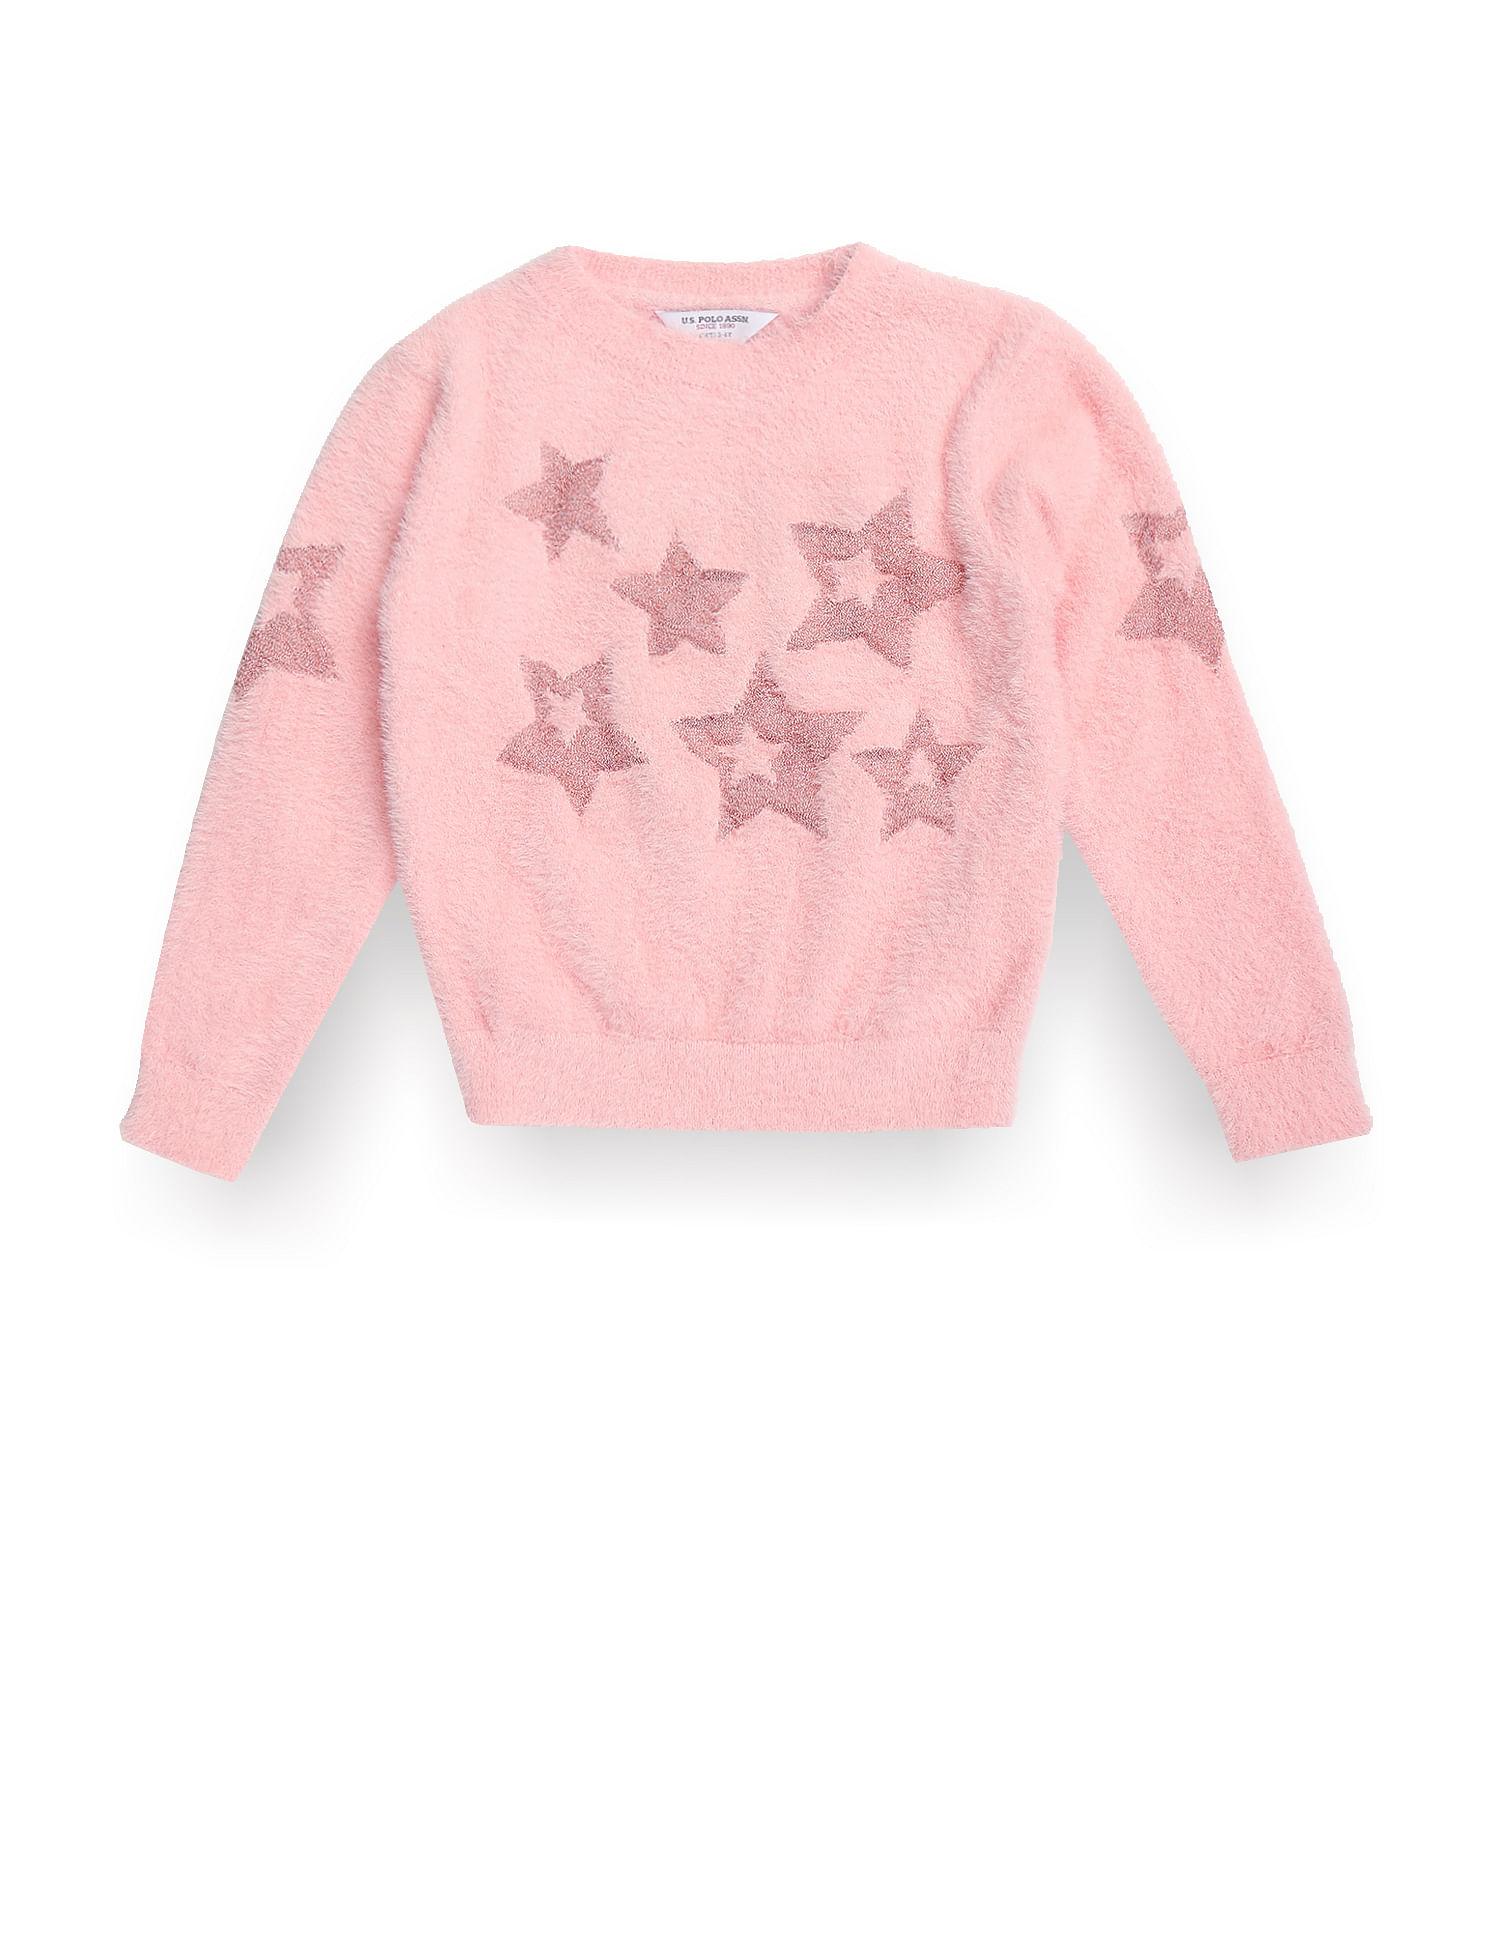 girls-patterned-knit-pullover-sweater